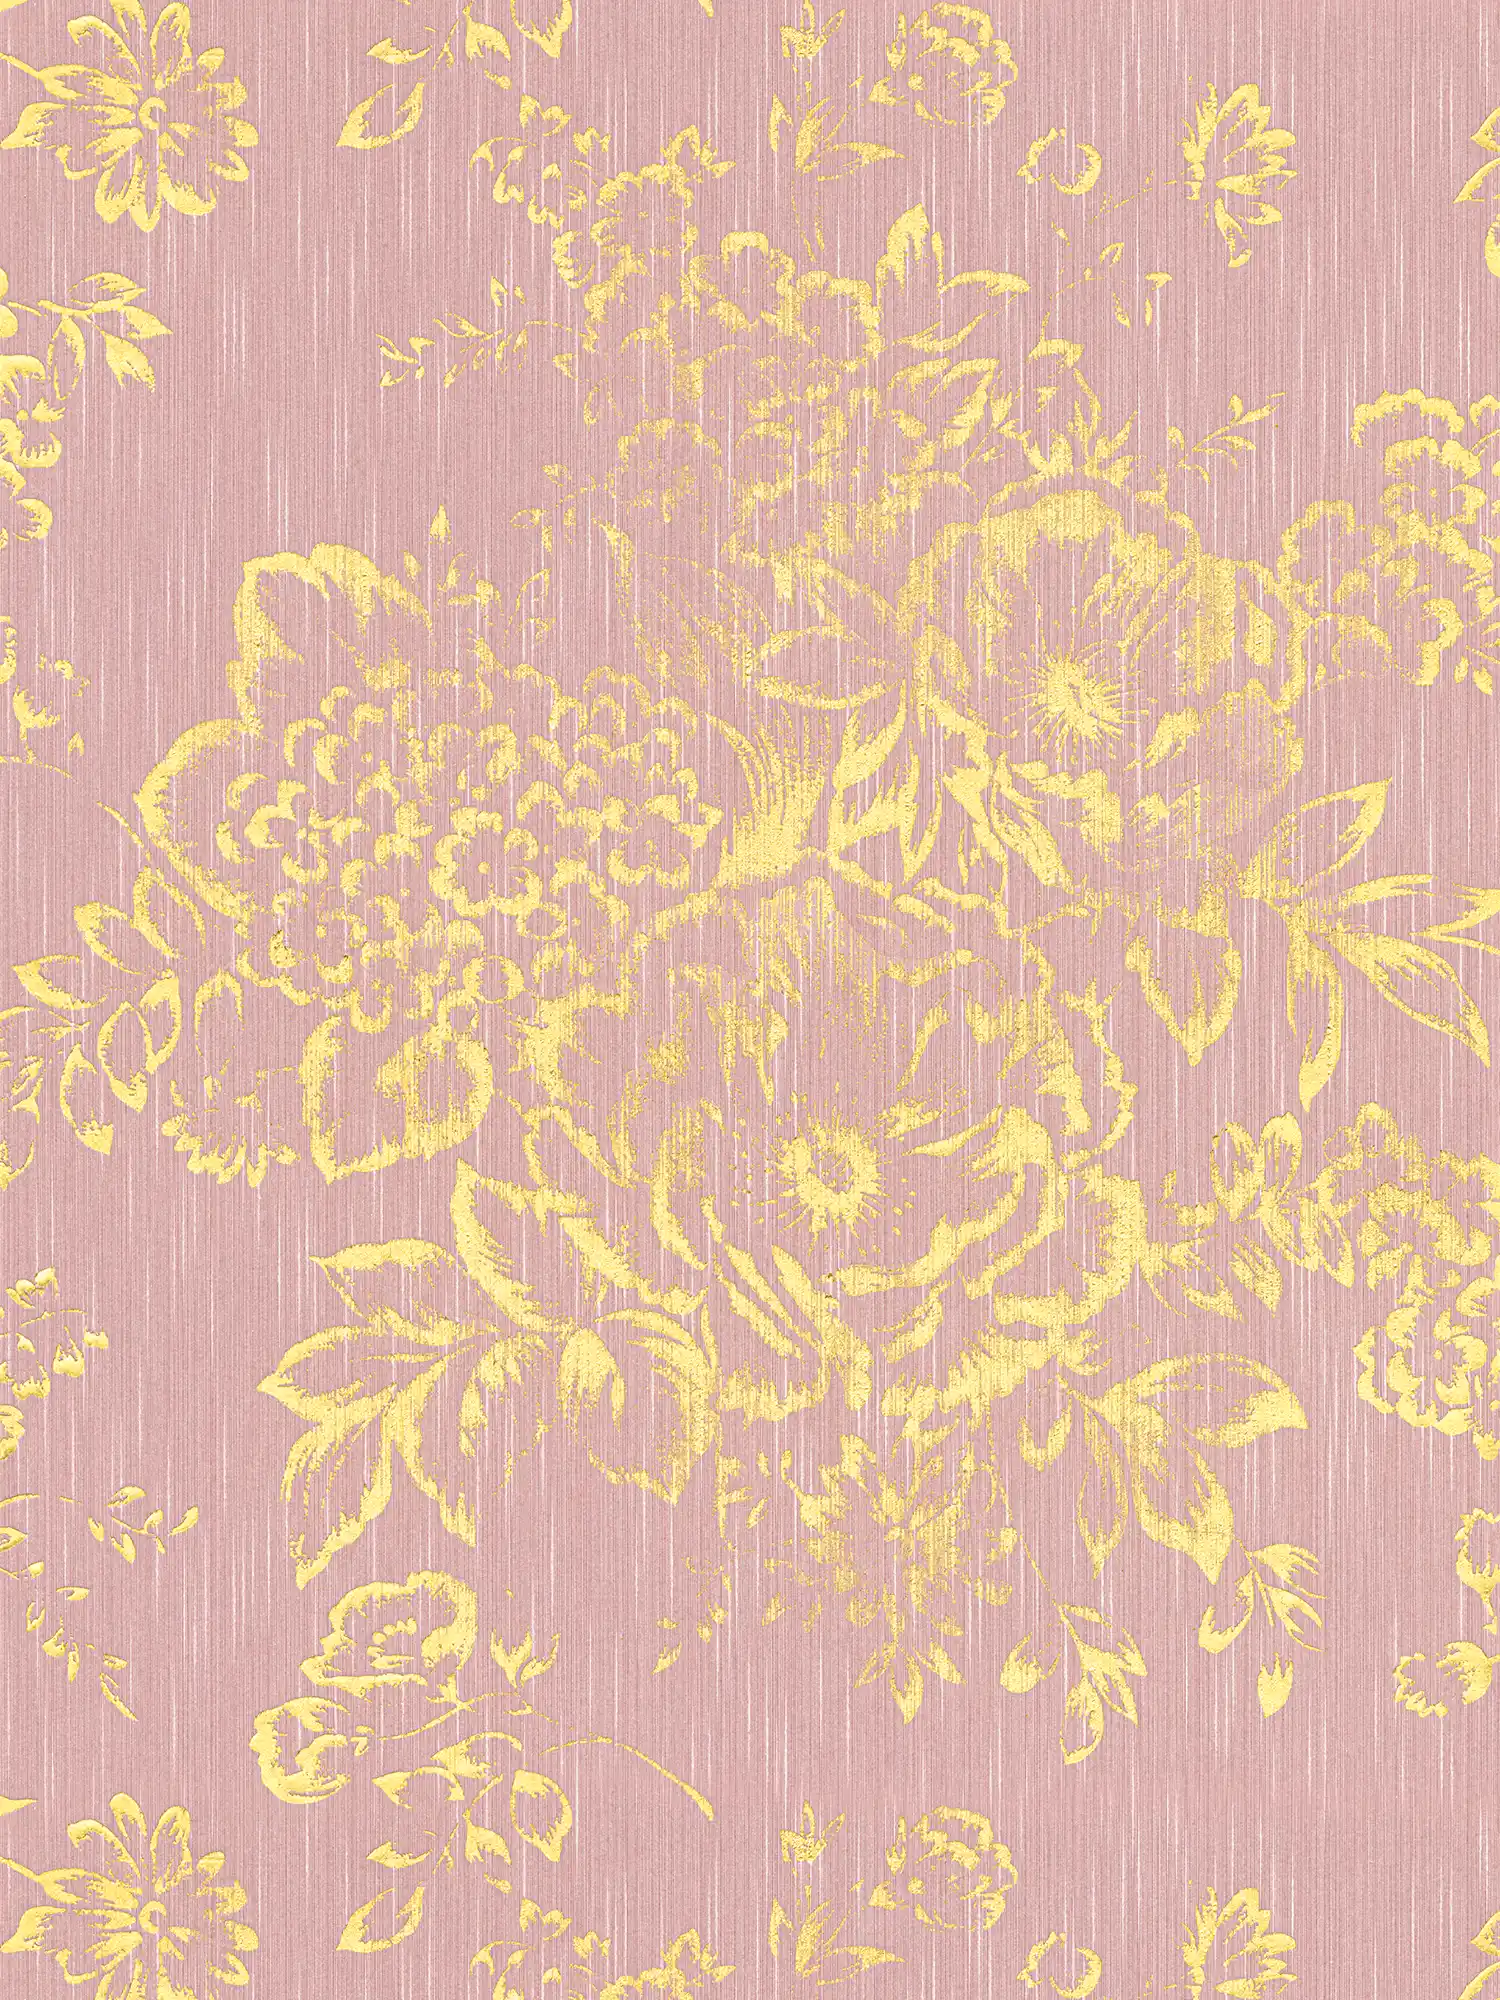 Textured wallpaper with golden floral pattern - gold, pink
